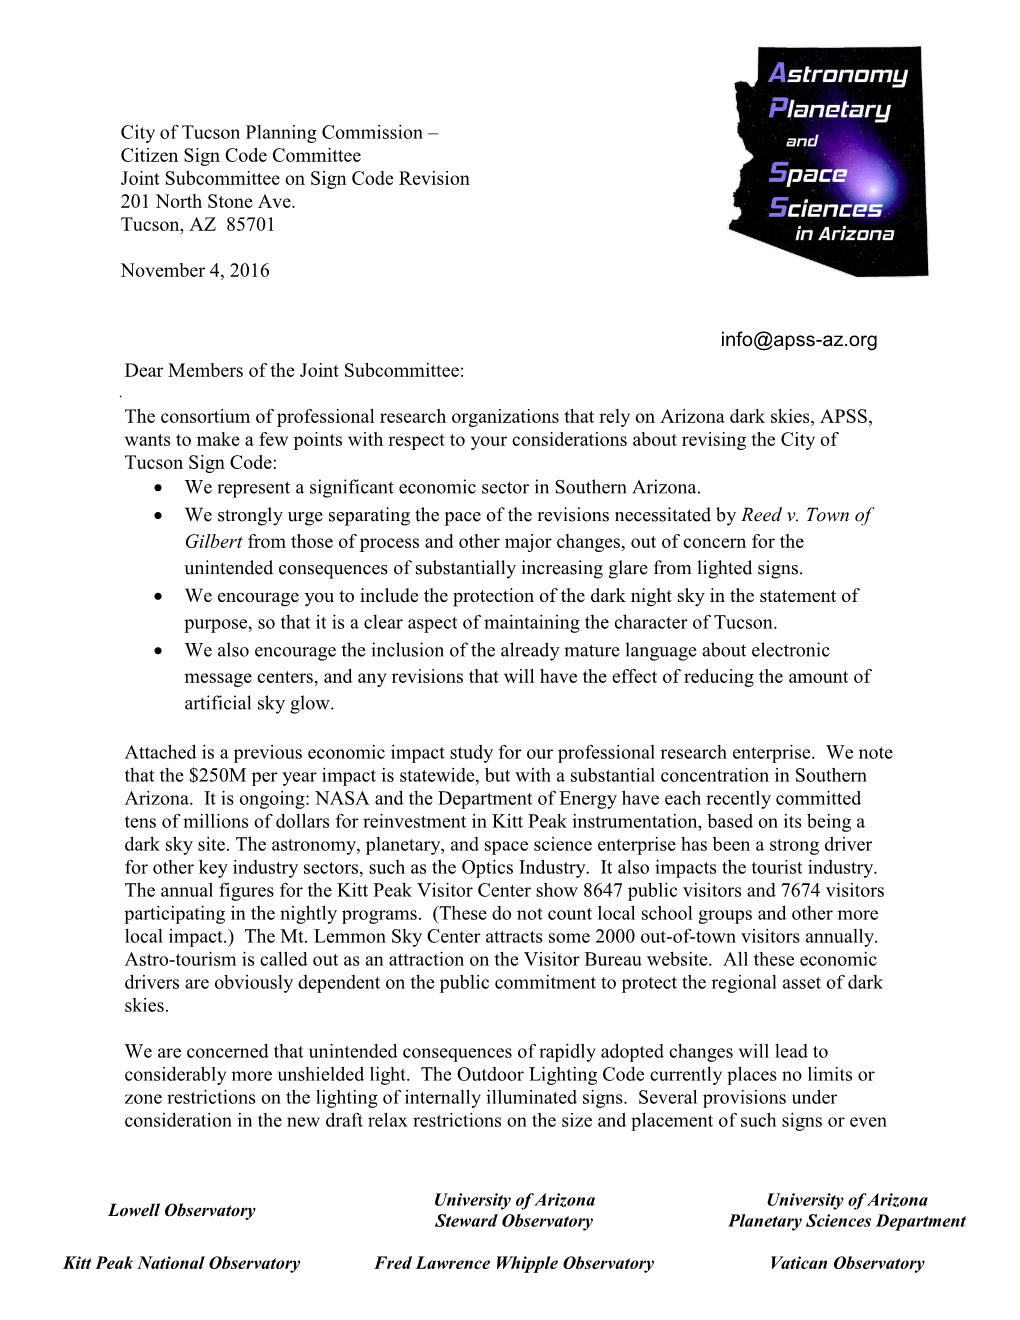 Letter from Astronomy Planetary and Space Sciences In